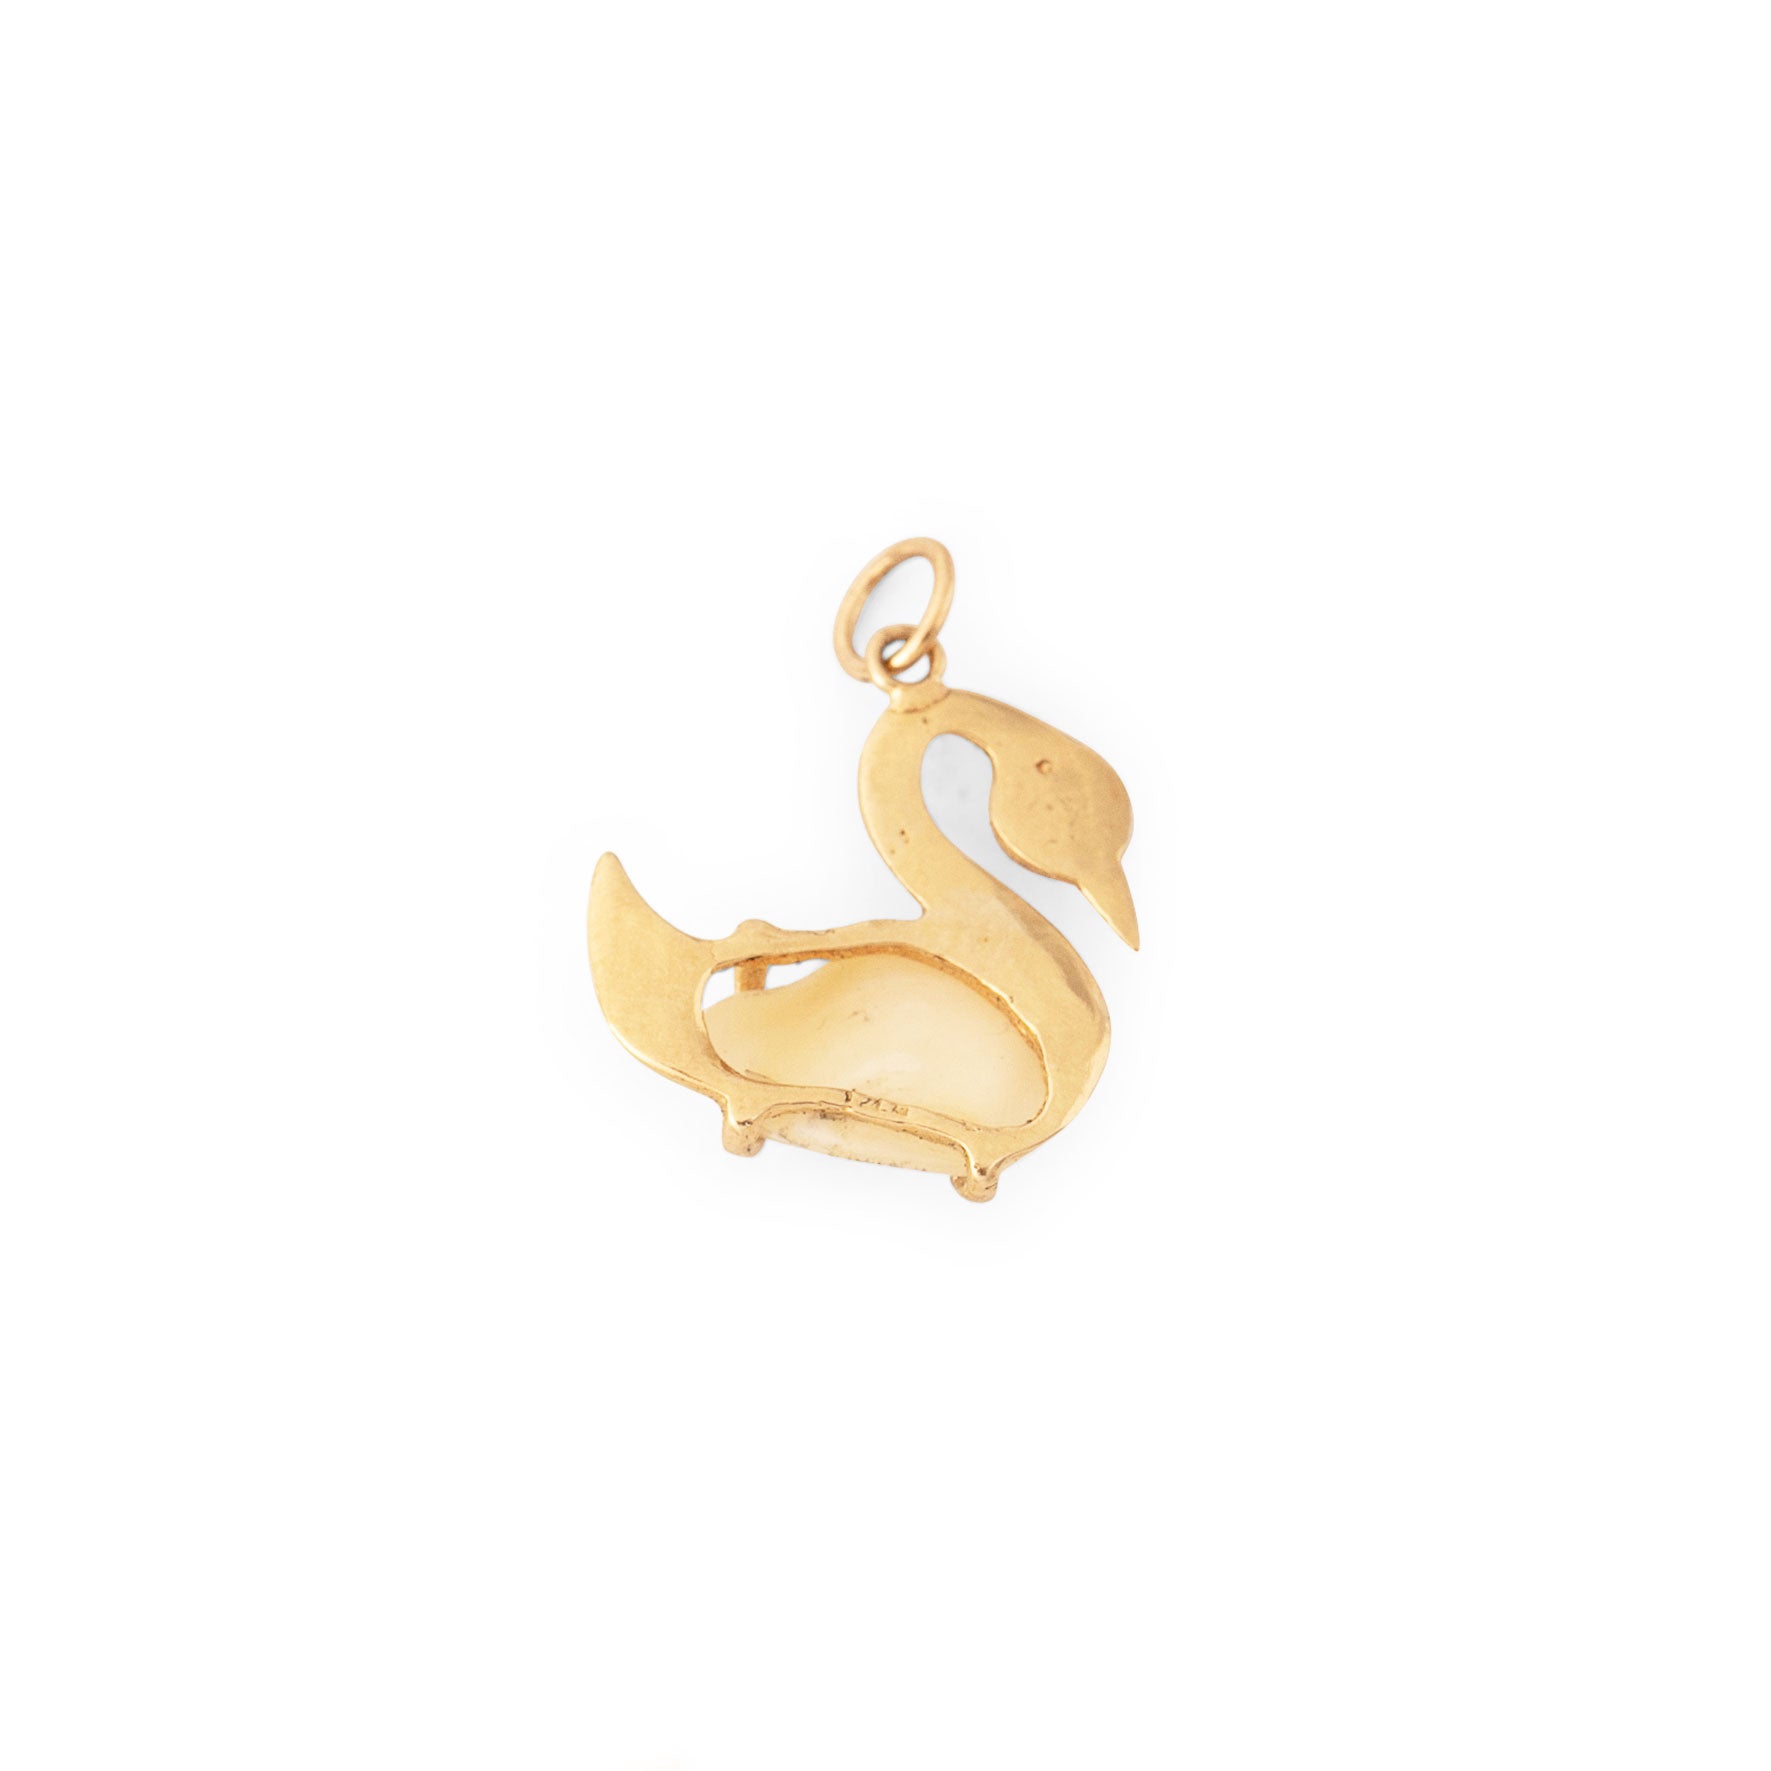 Swan 14k Gold and Citrine Charm